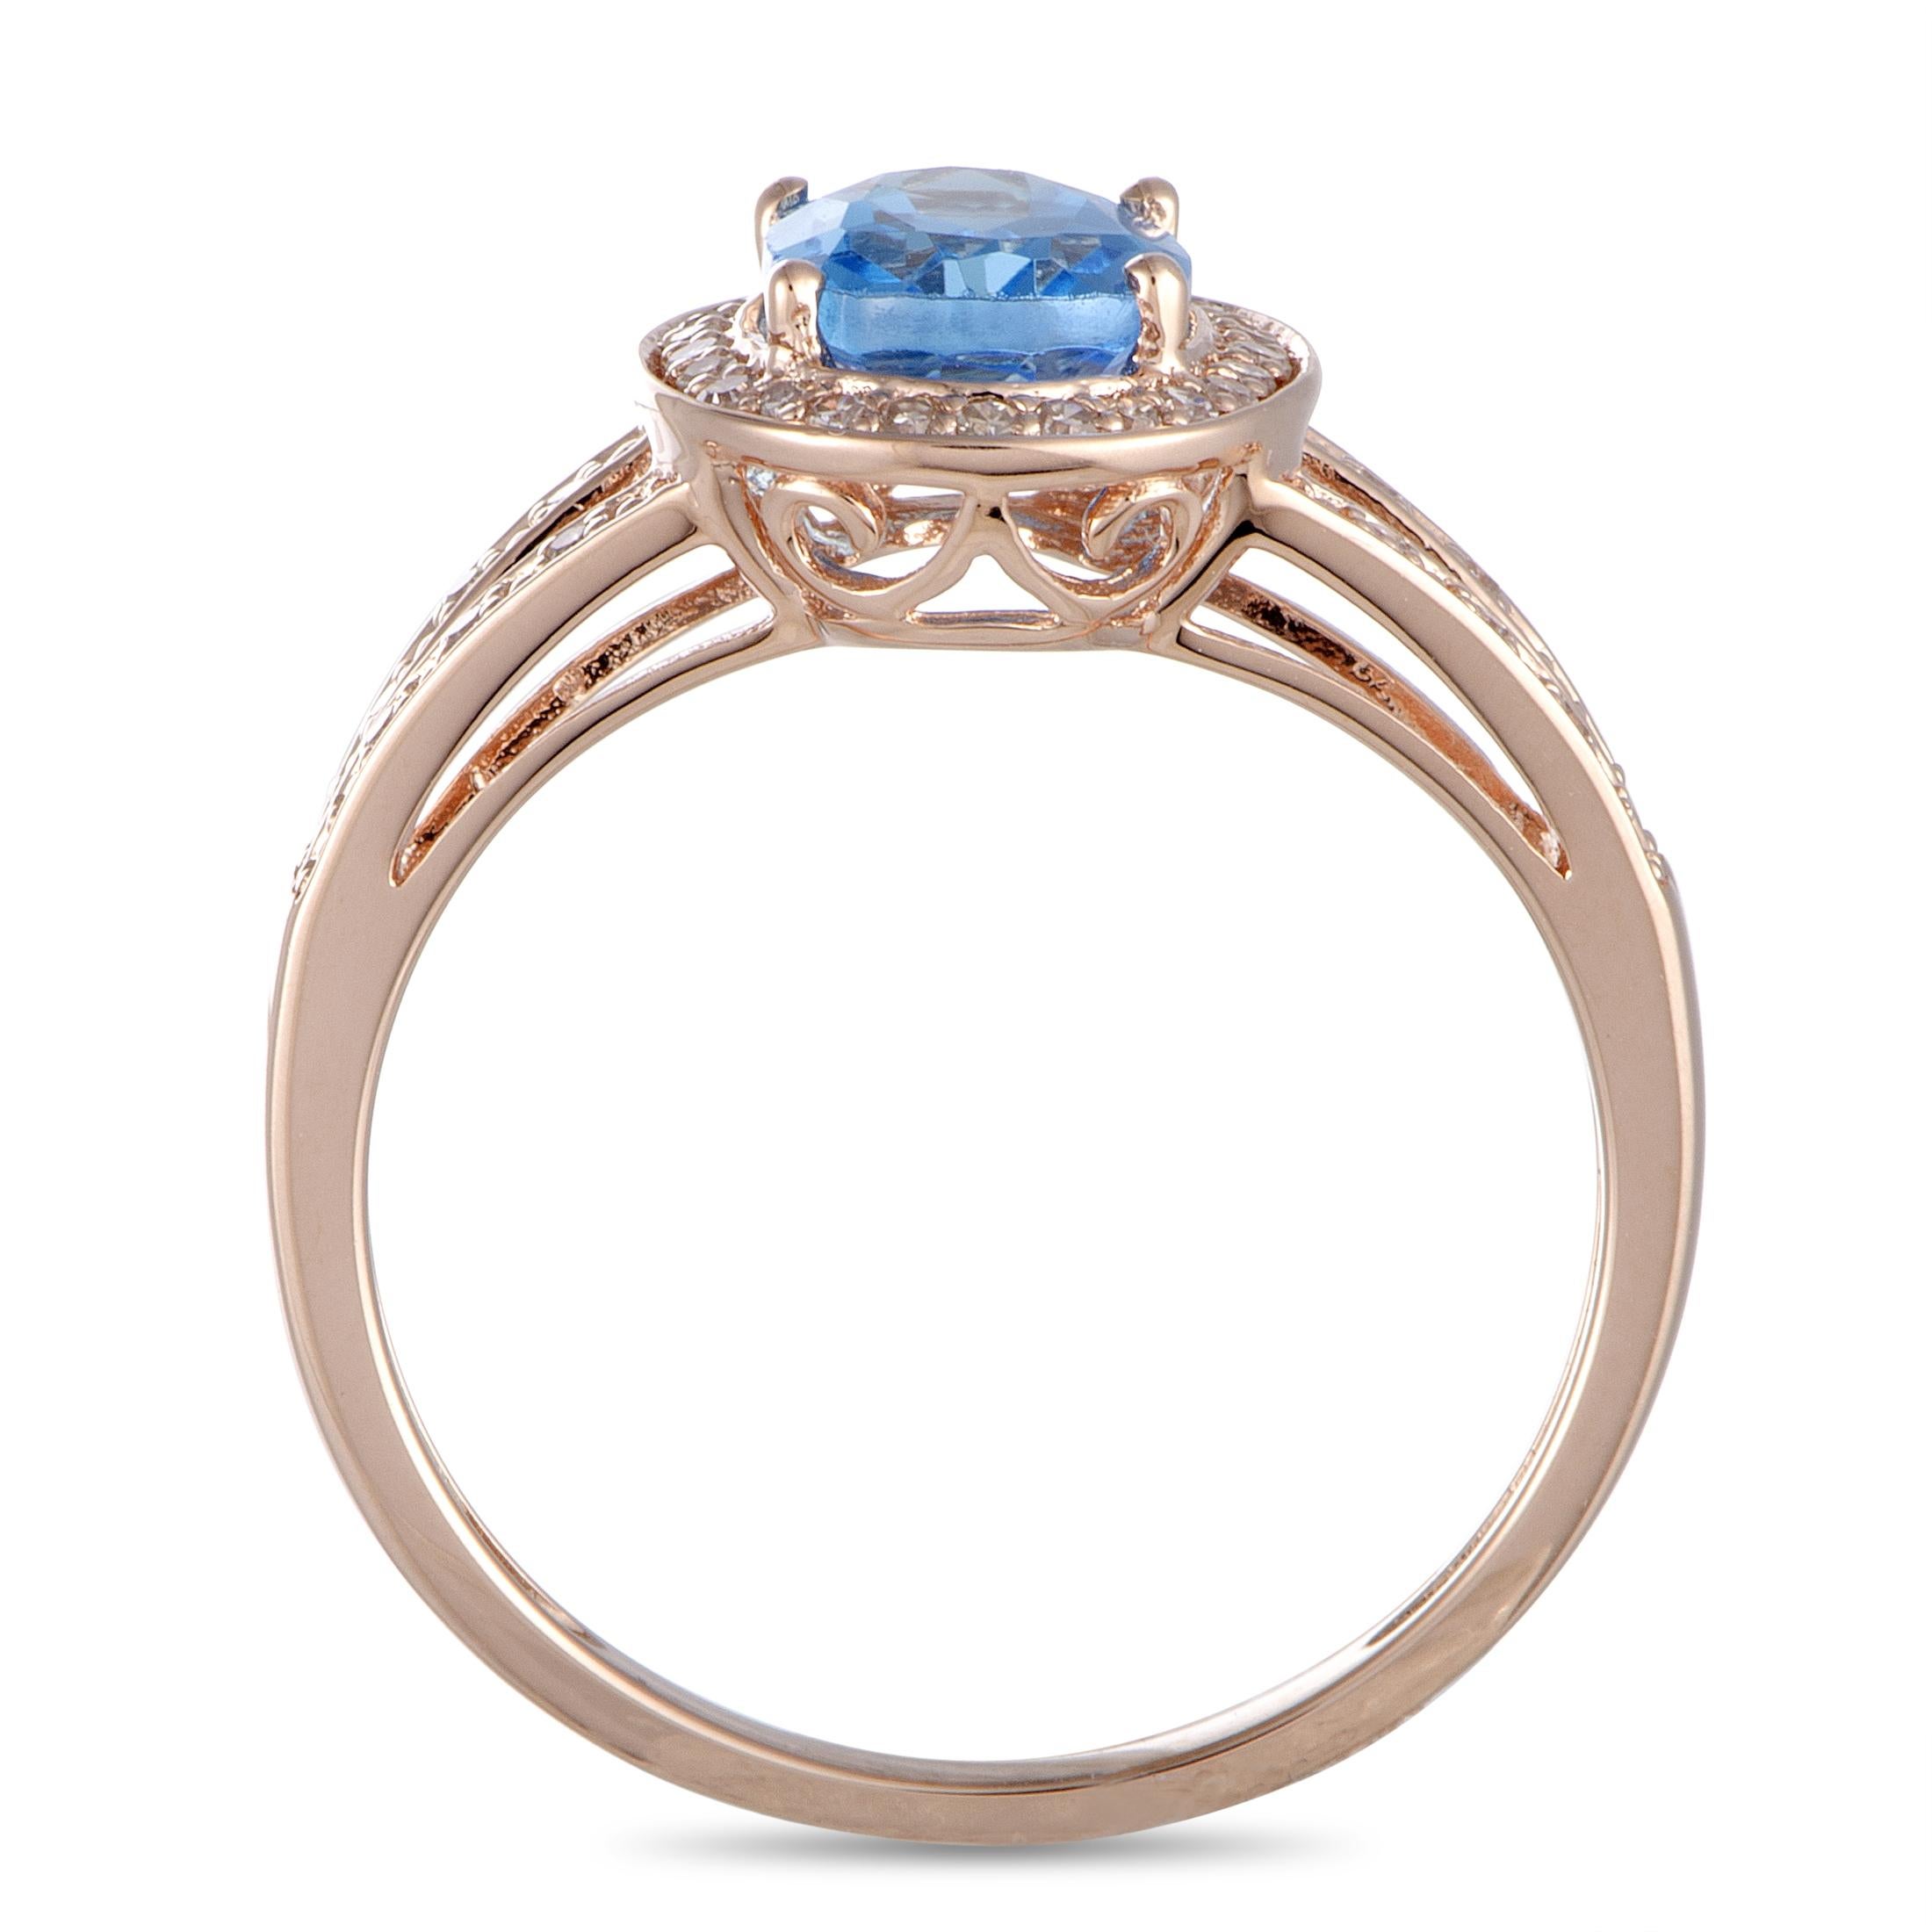 This ring is crafted from 14K rose gold and set with a topaz and with diamonds that amount to 0.16 carats. The ring weighs 2.6 grams, boasting band thickness of 2 mm and top height of 6 mm, while top dimensions measure 12 by 10 mm.
 
 Offered in